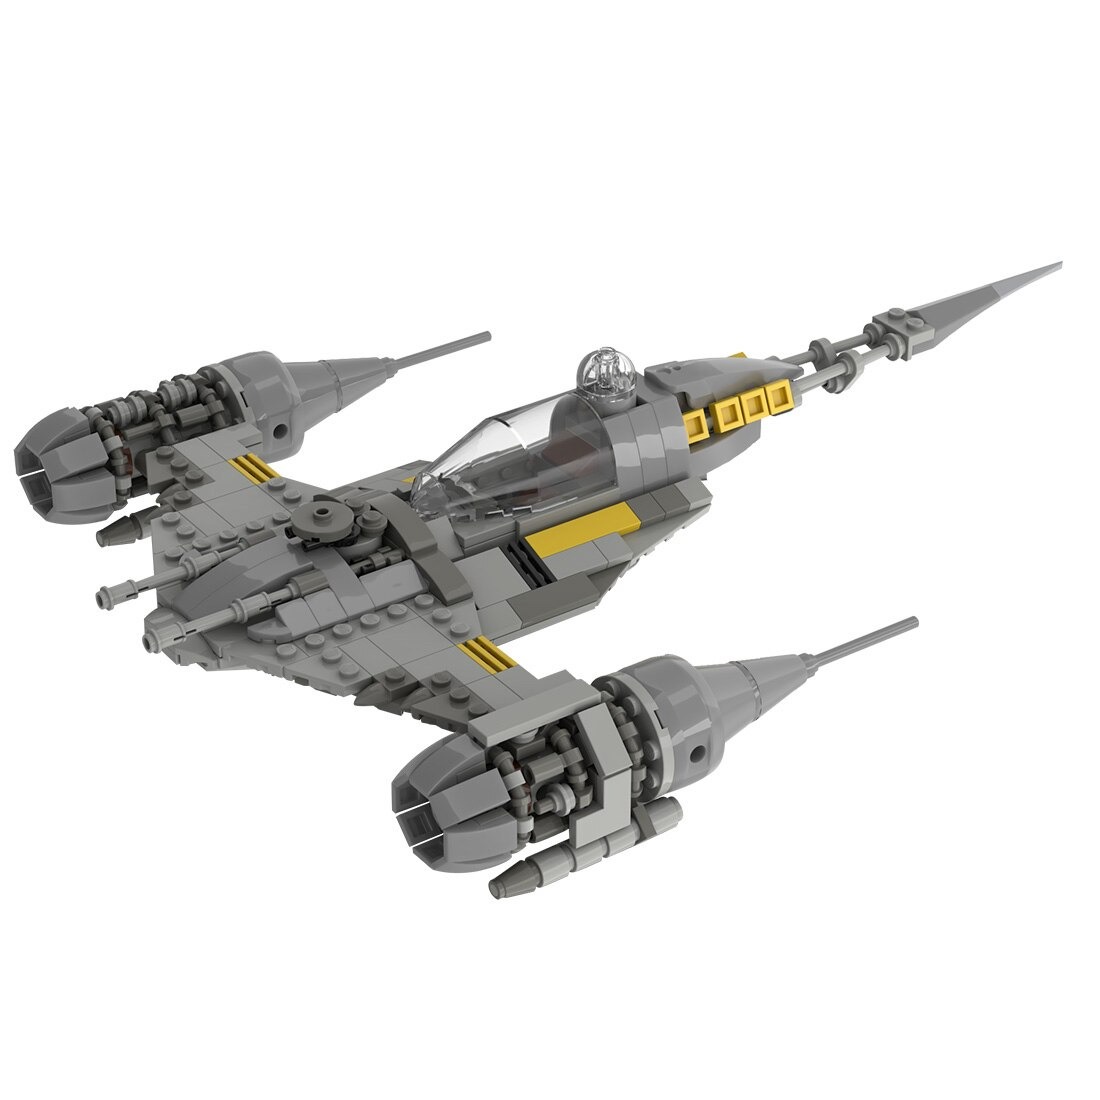 authorized moc 100546 n 1 starfighter bui main 0 1